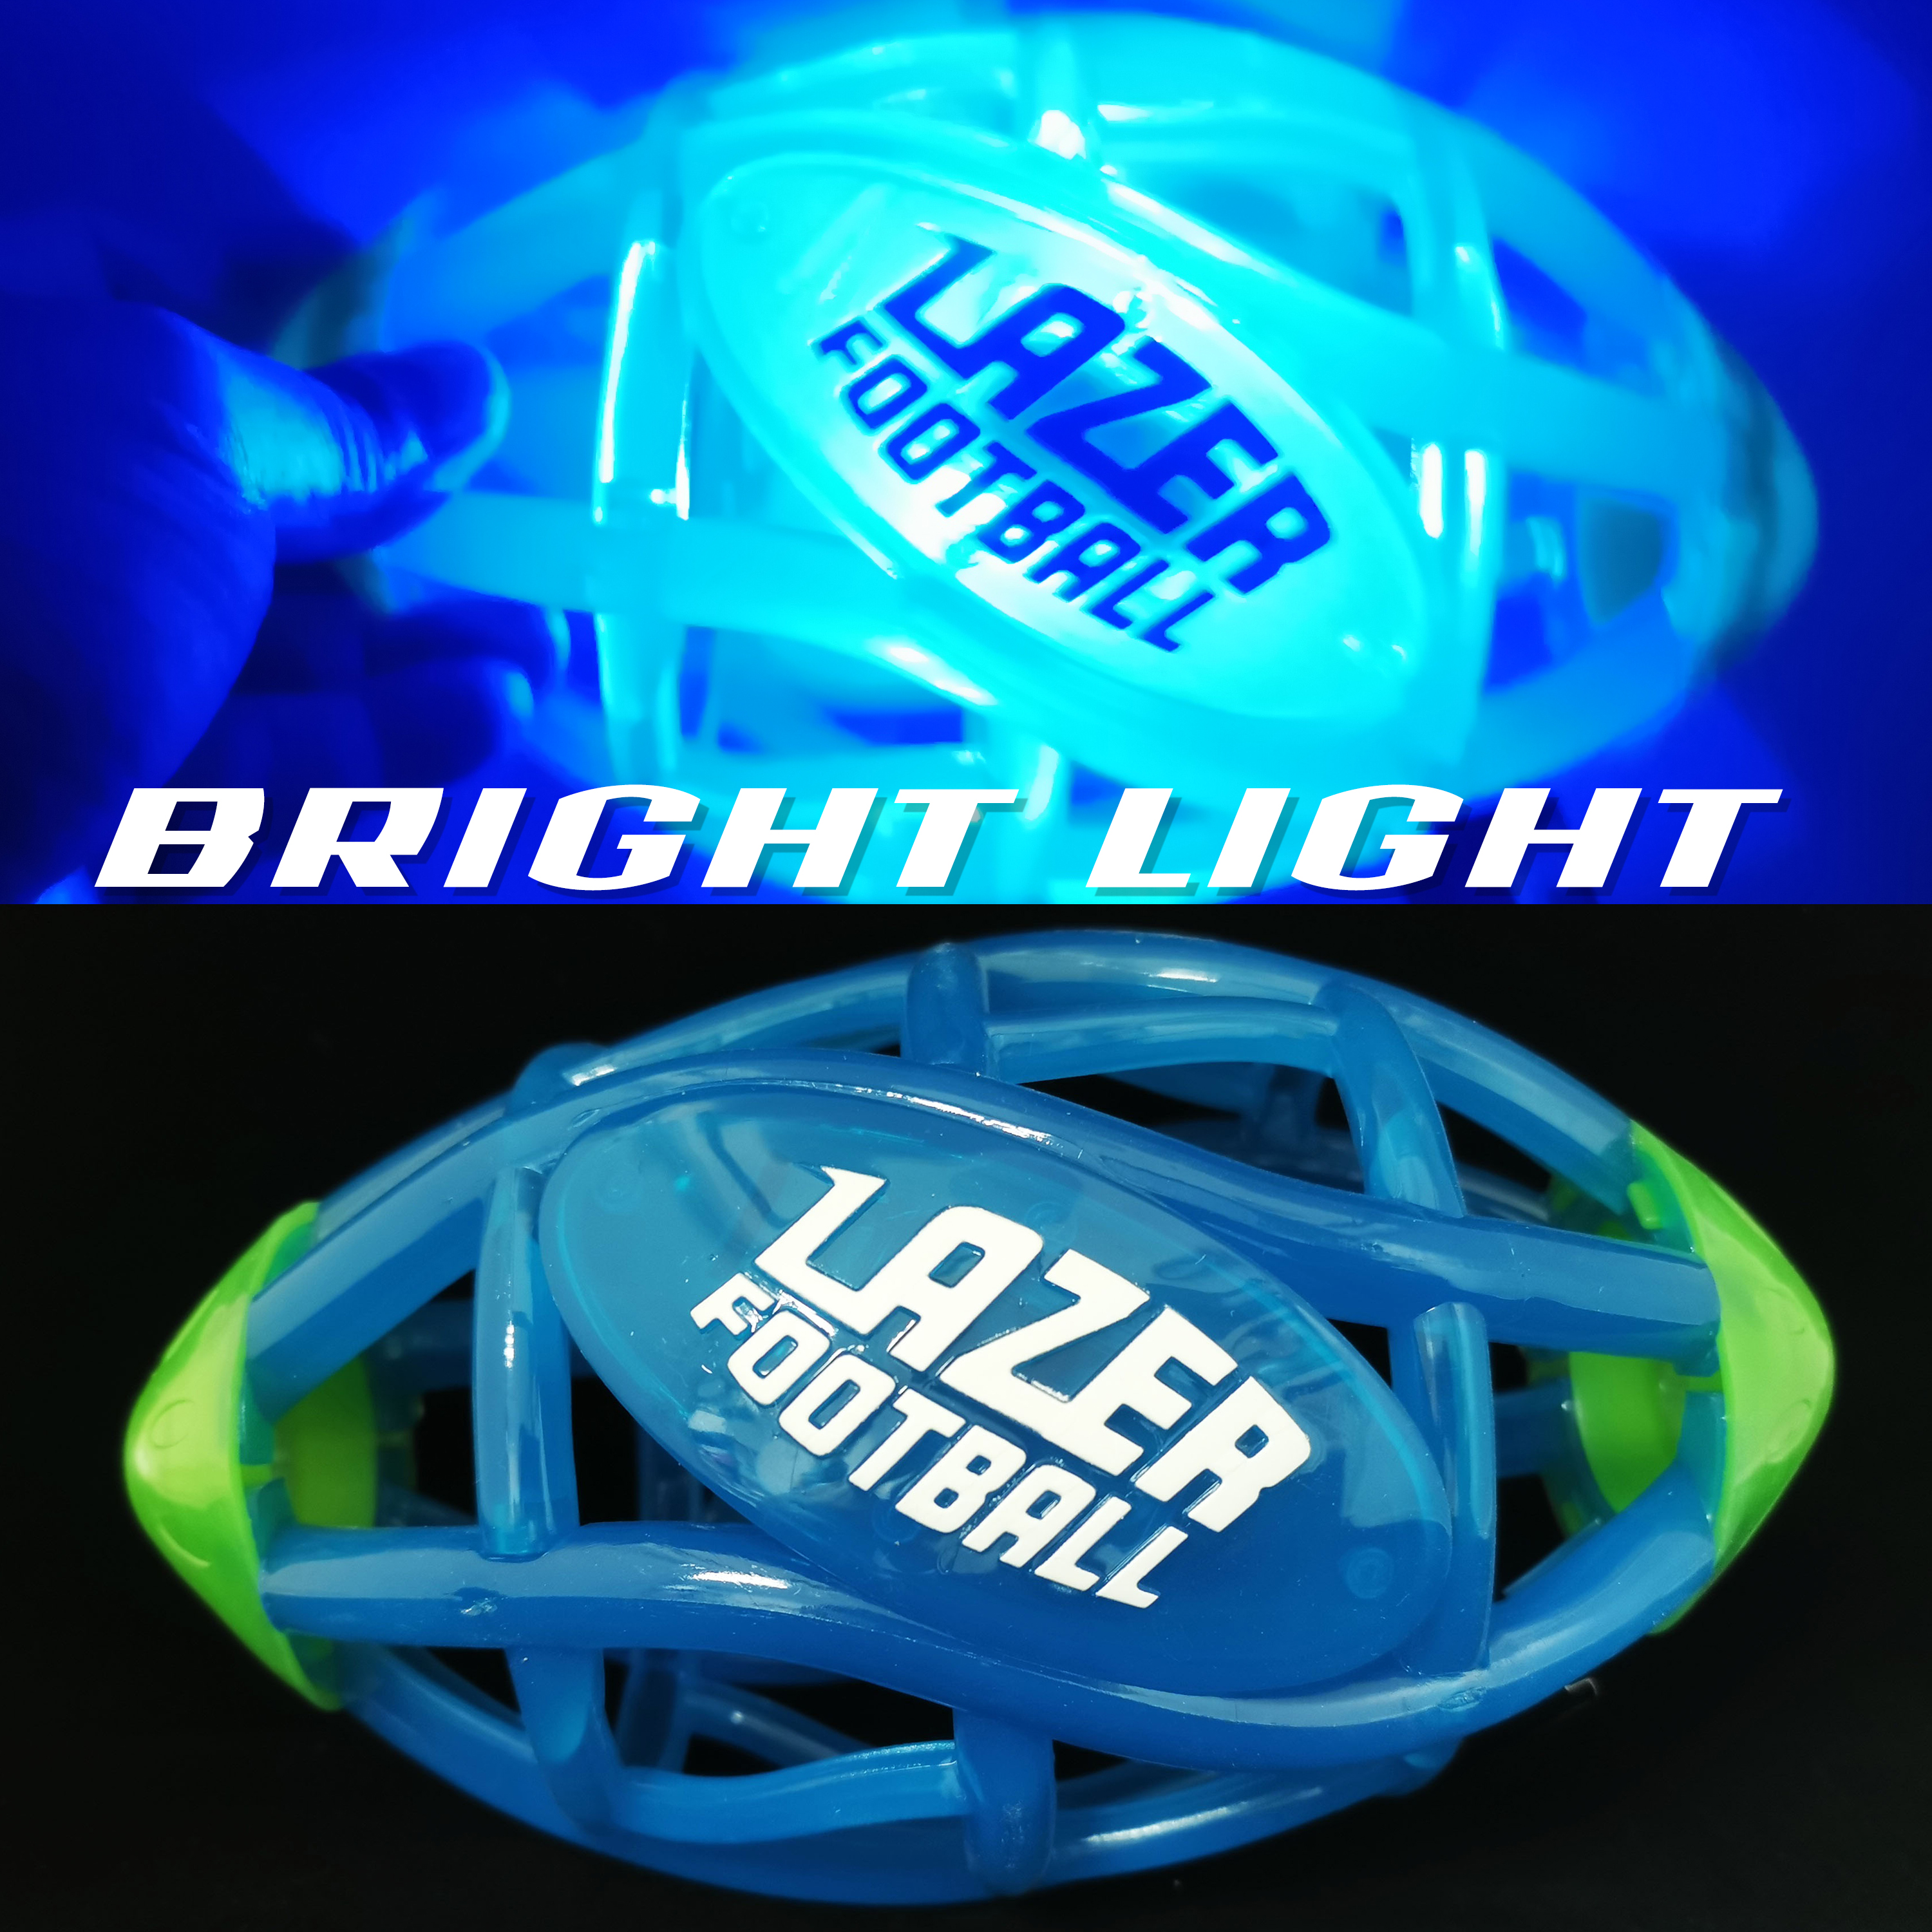 Lazer Light Up Glow Rubber Toy Football, Green and Blue, Pee Wee Size 3 - image 3 of 5